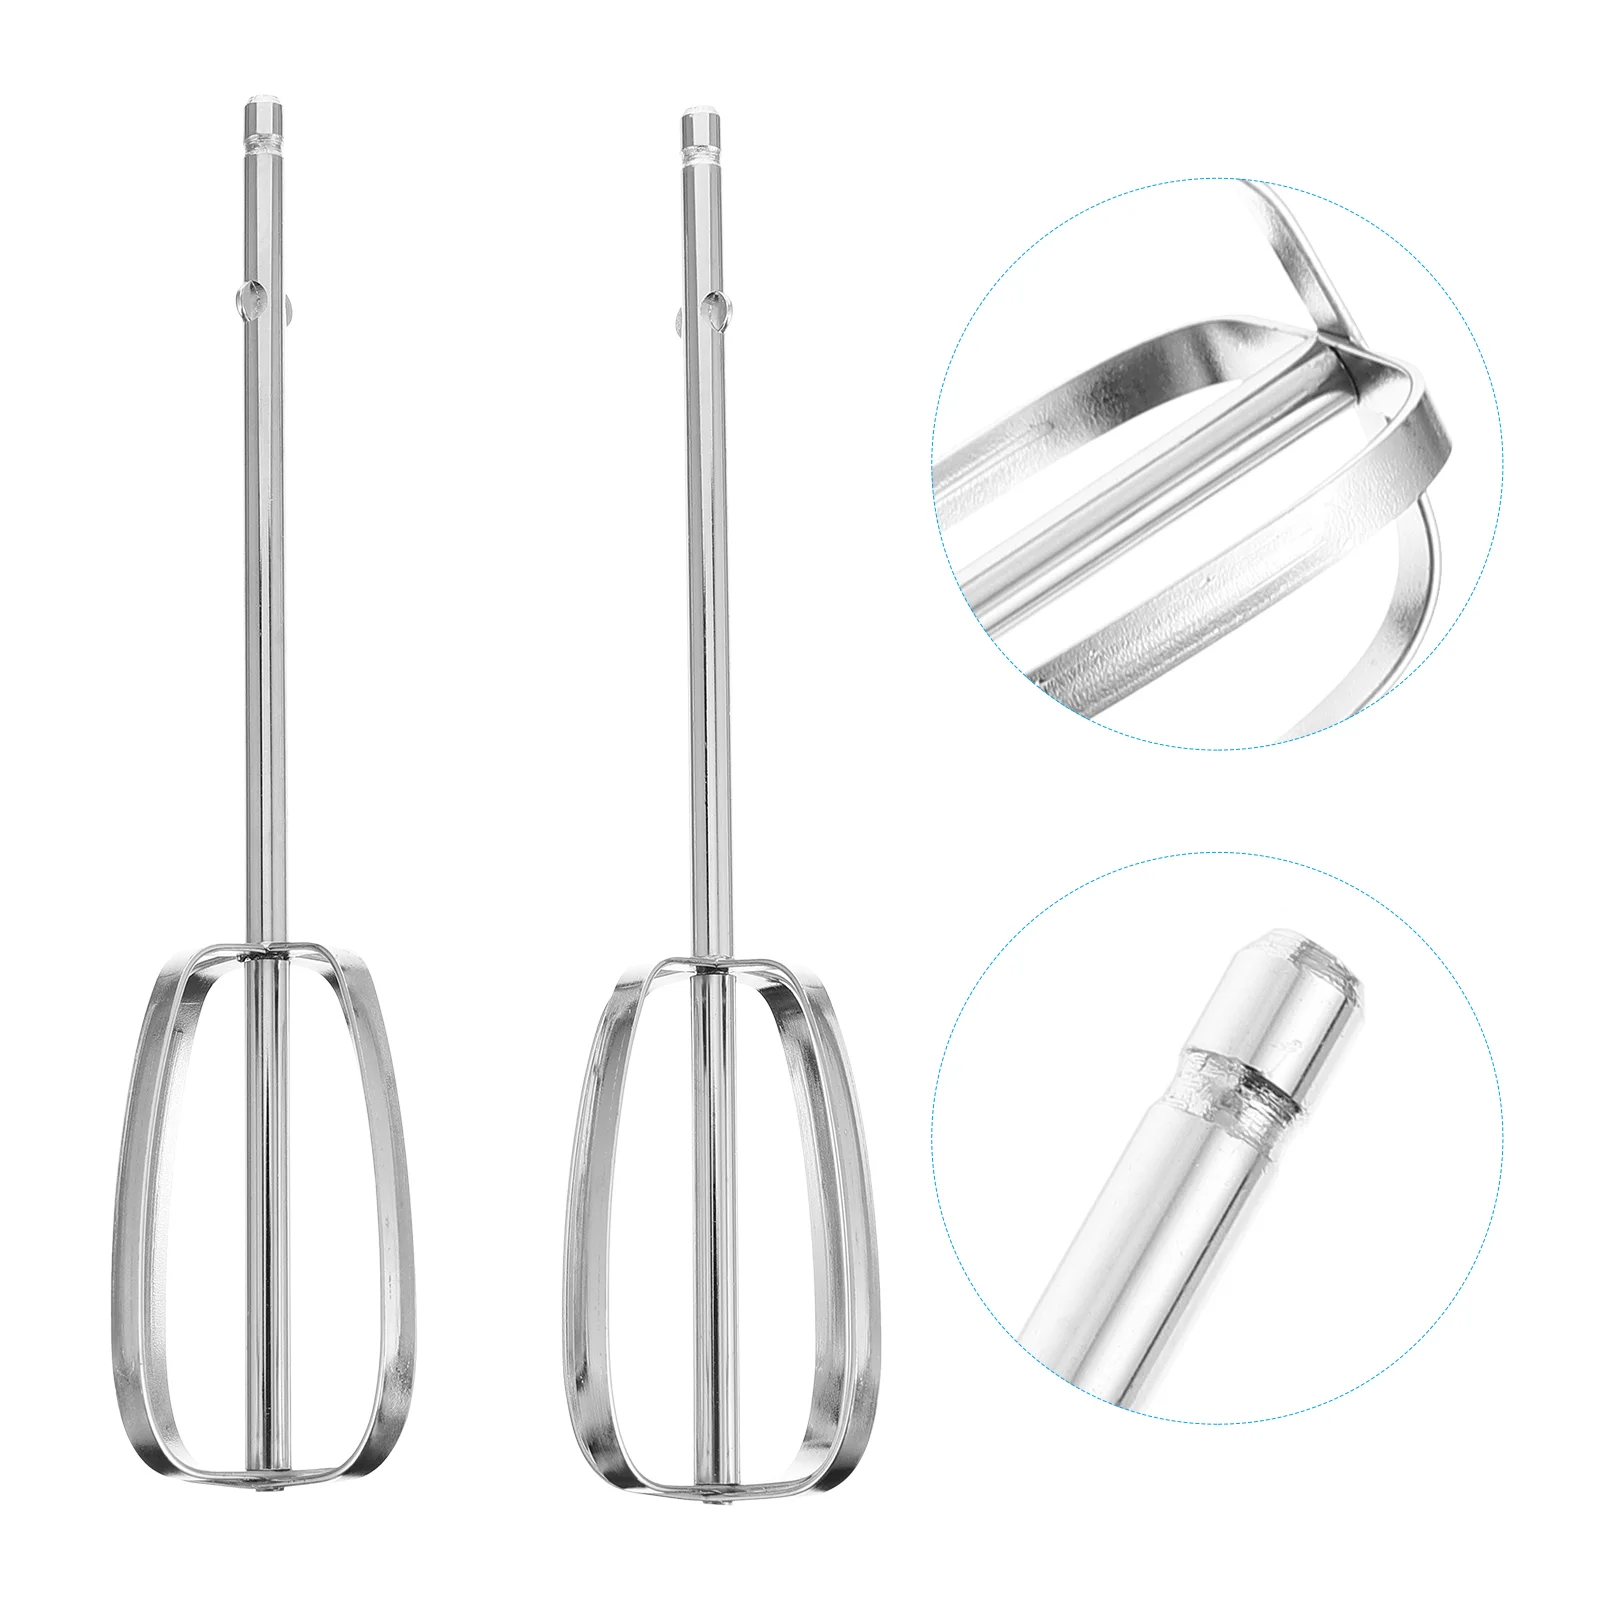 

Whisk Home Cooking Stirrer Hand Egg Mixing Tool Electric Mixer Handheld Milk Manual Eggbeater Stainless -held